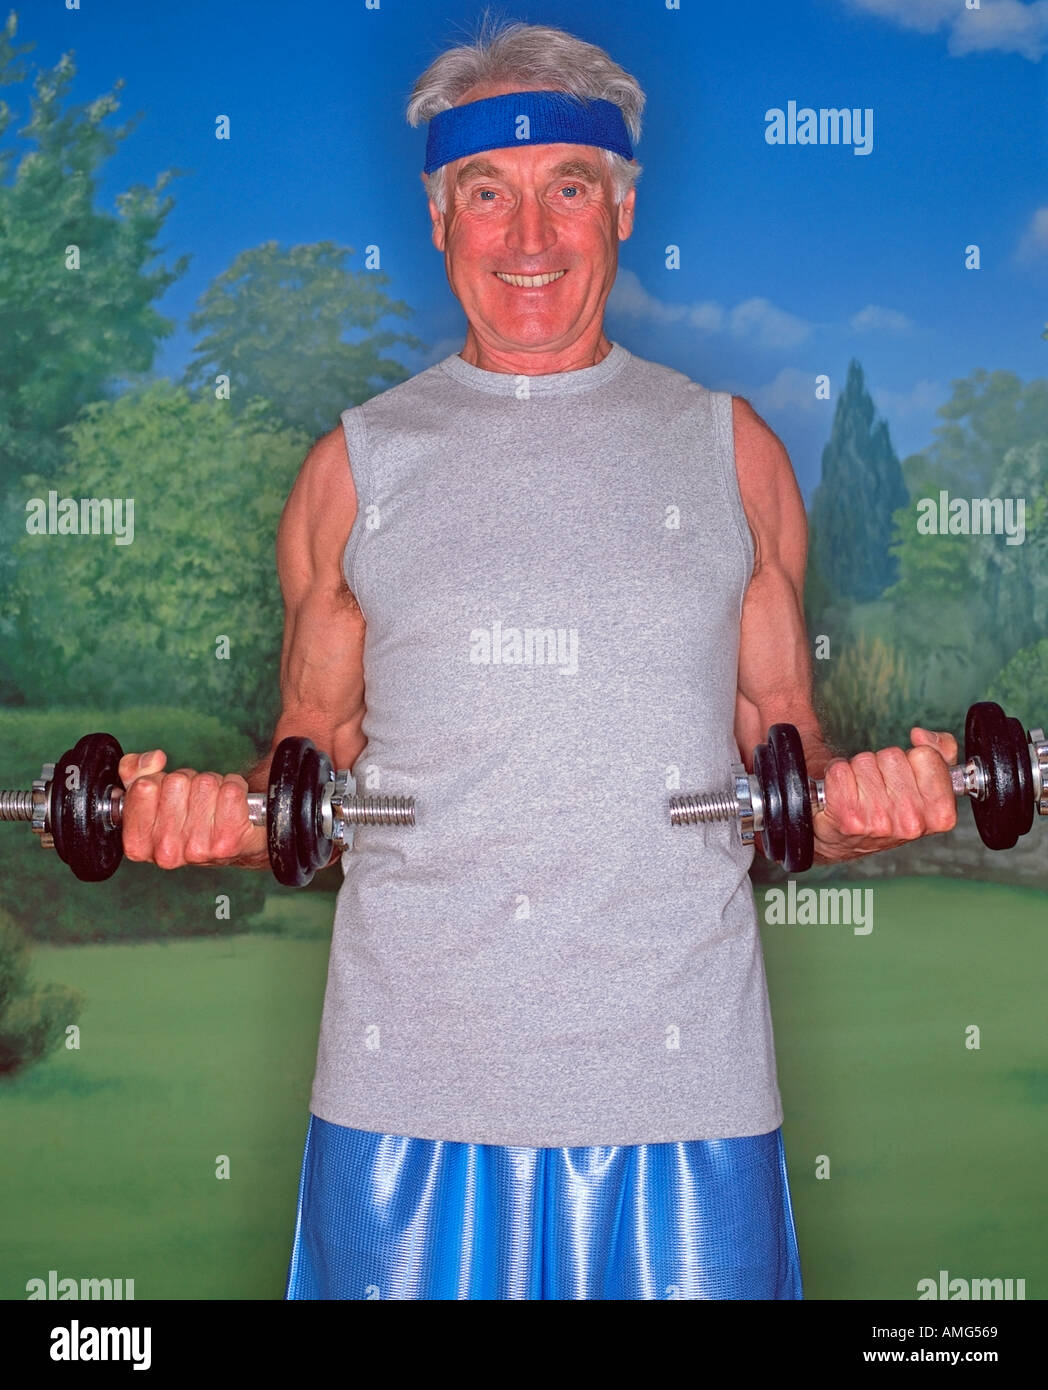 A portrait of a mature man in vest holding dumbells against a garden background Stock Photo